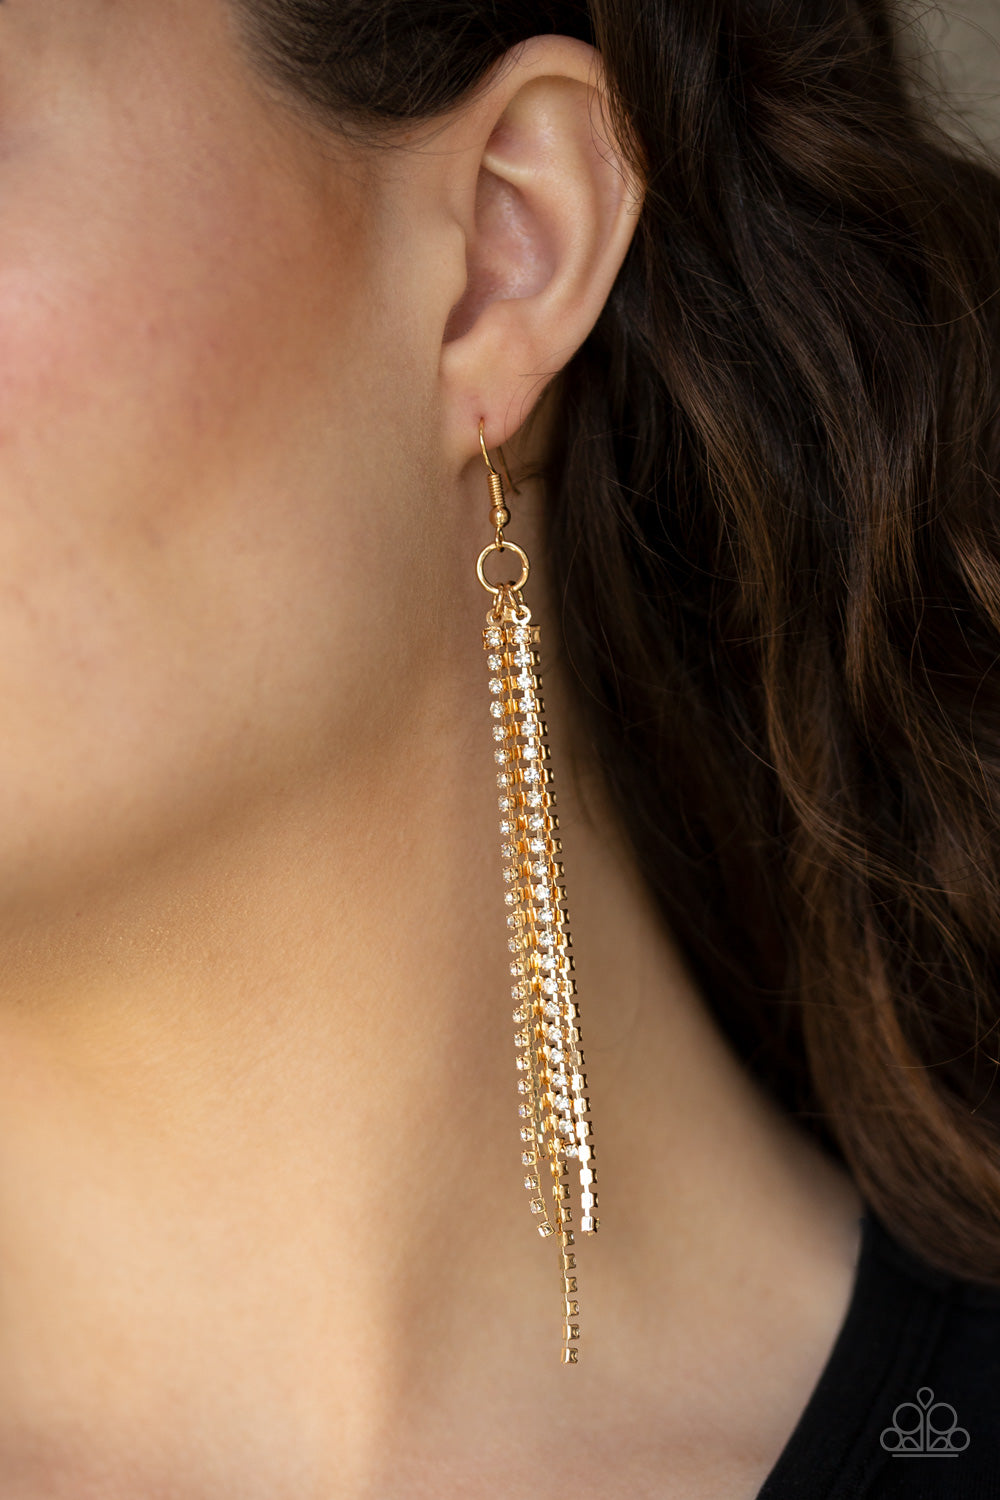 Paparazzi ♥ Center Stage Status - Gold ♥  Earrings